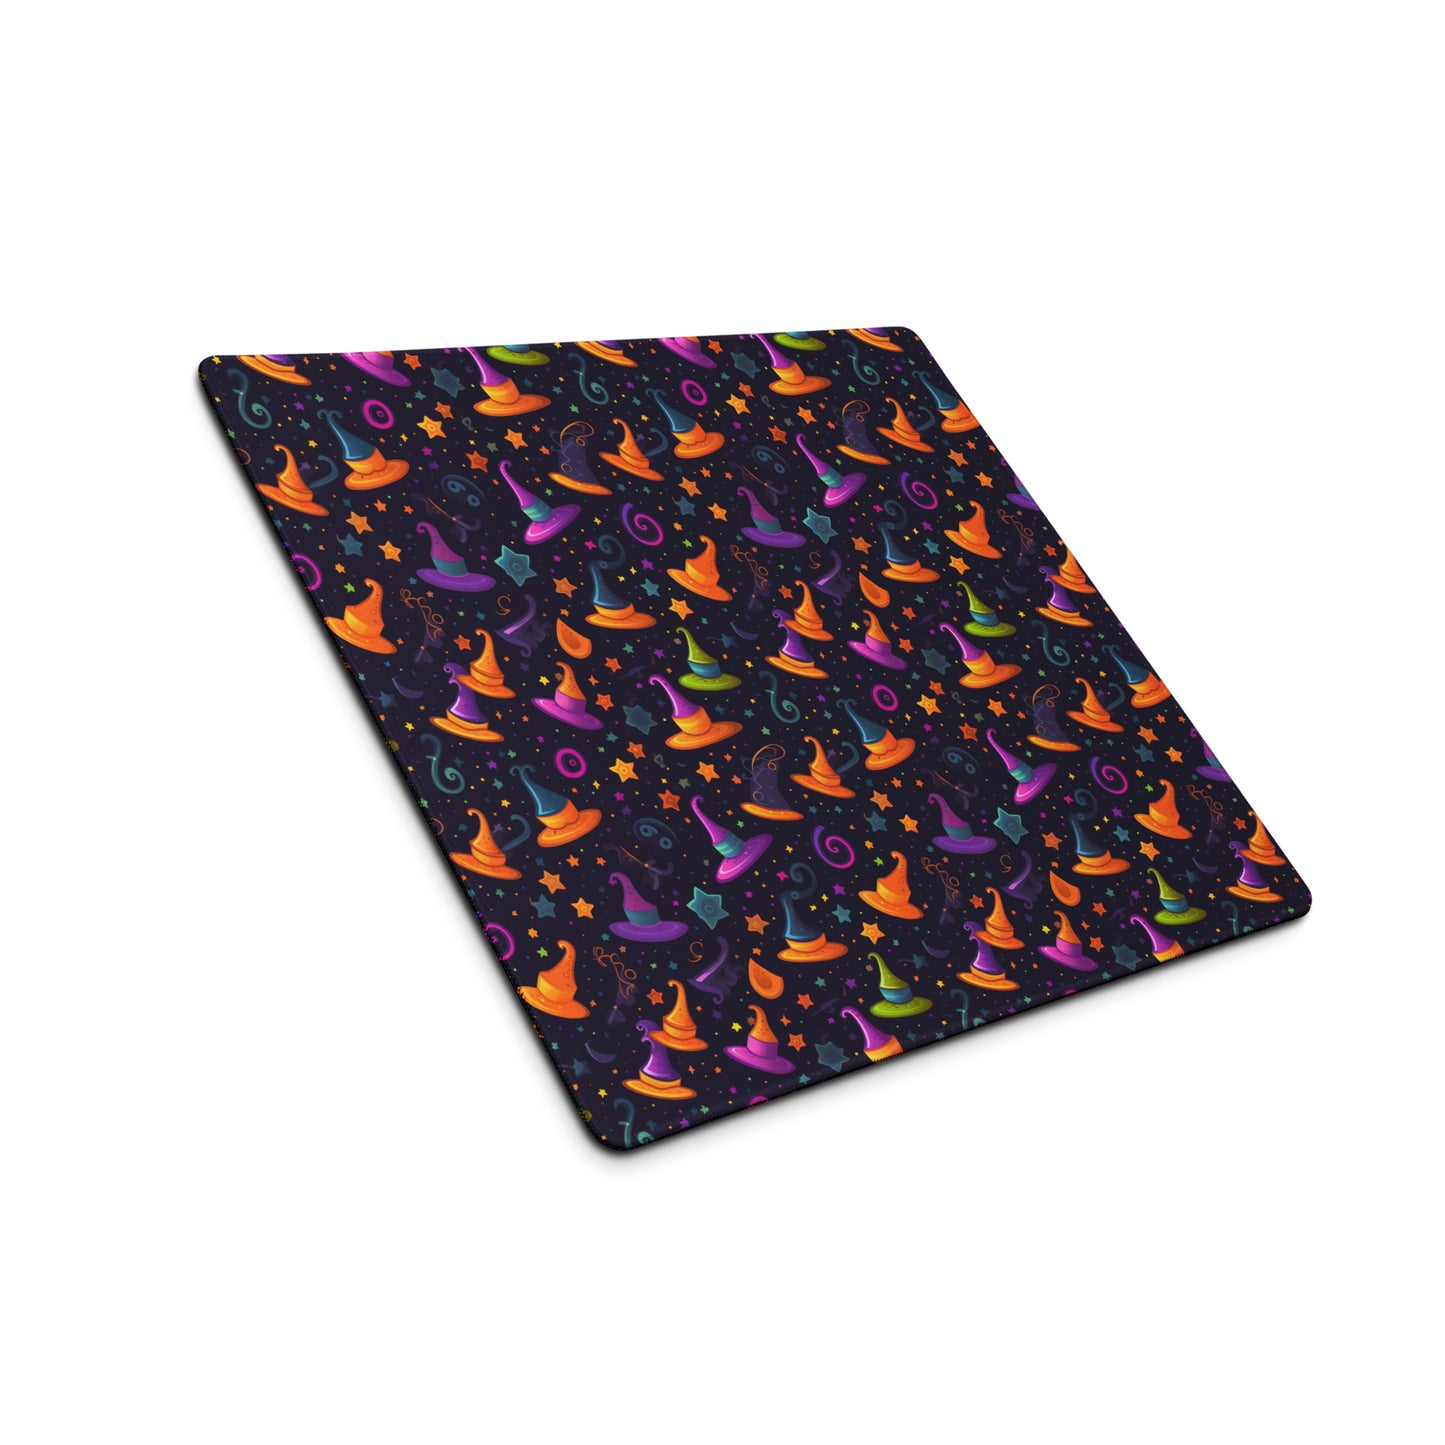 A 18" x 16" desk pad with a orange and purple wizard hat pattern sitting at an angle.